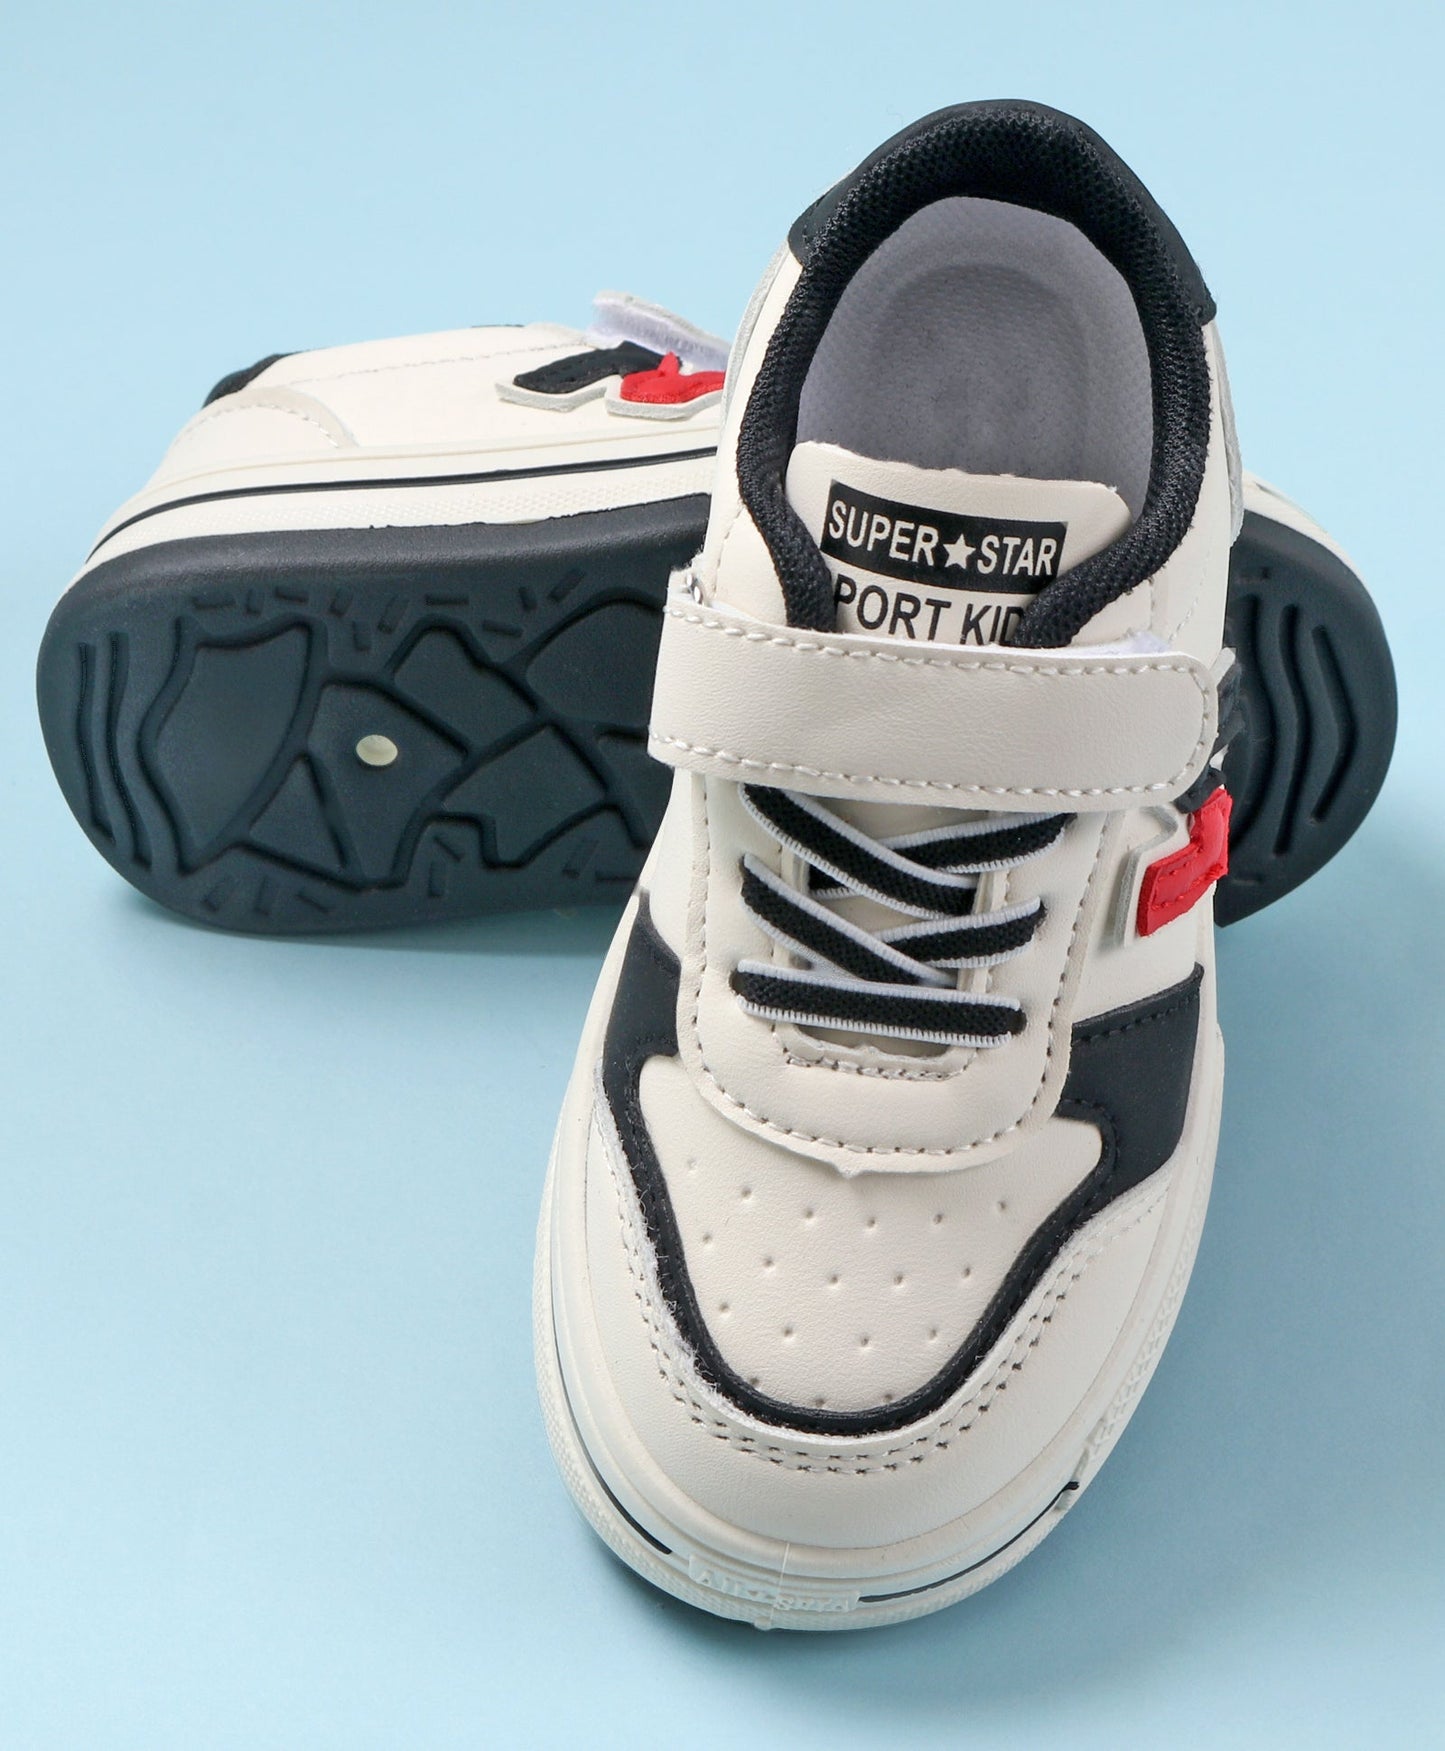 N PATCH VELCRO CLOSURE SNEAKERS - WHITE & BLACK